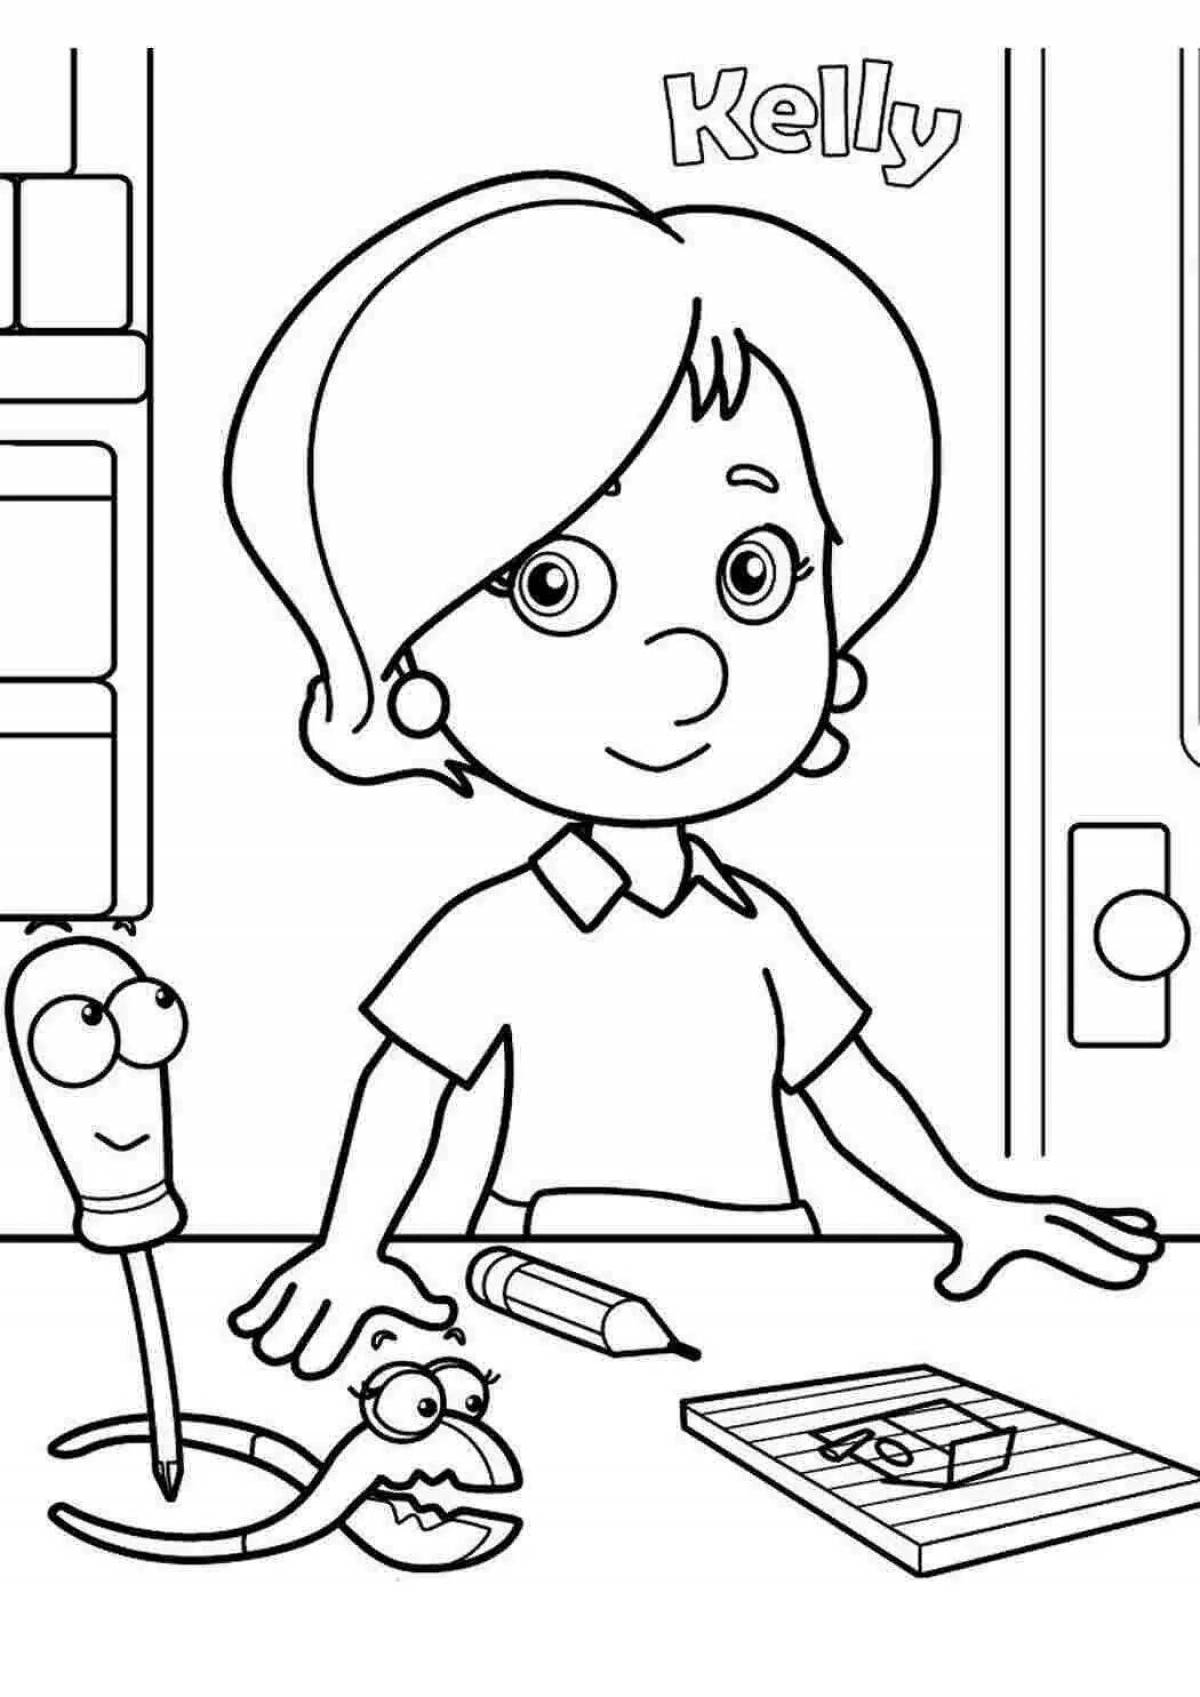 Colorful cog coloring page